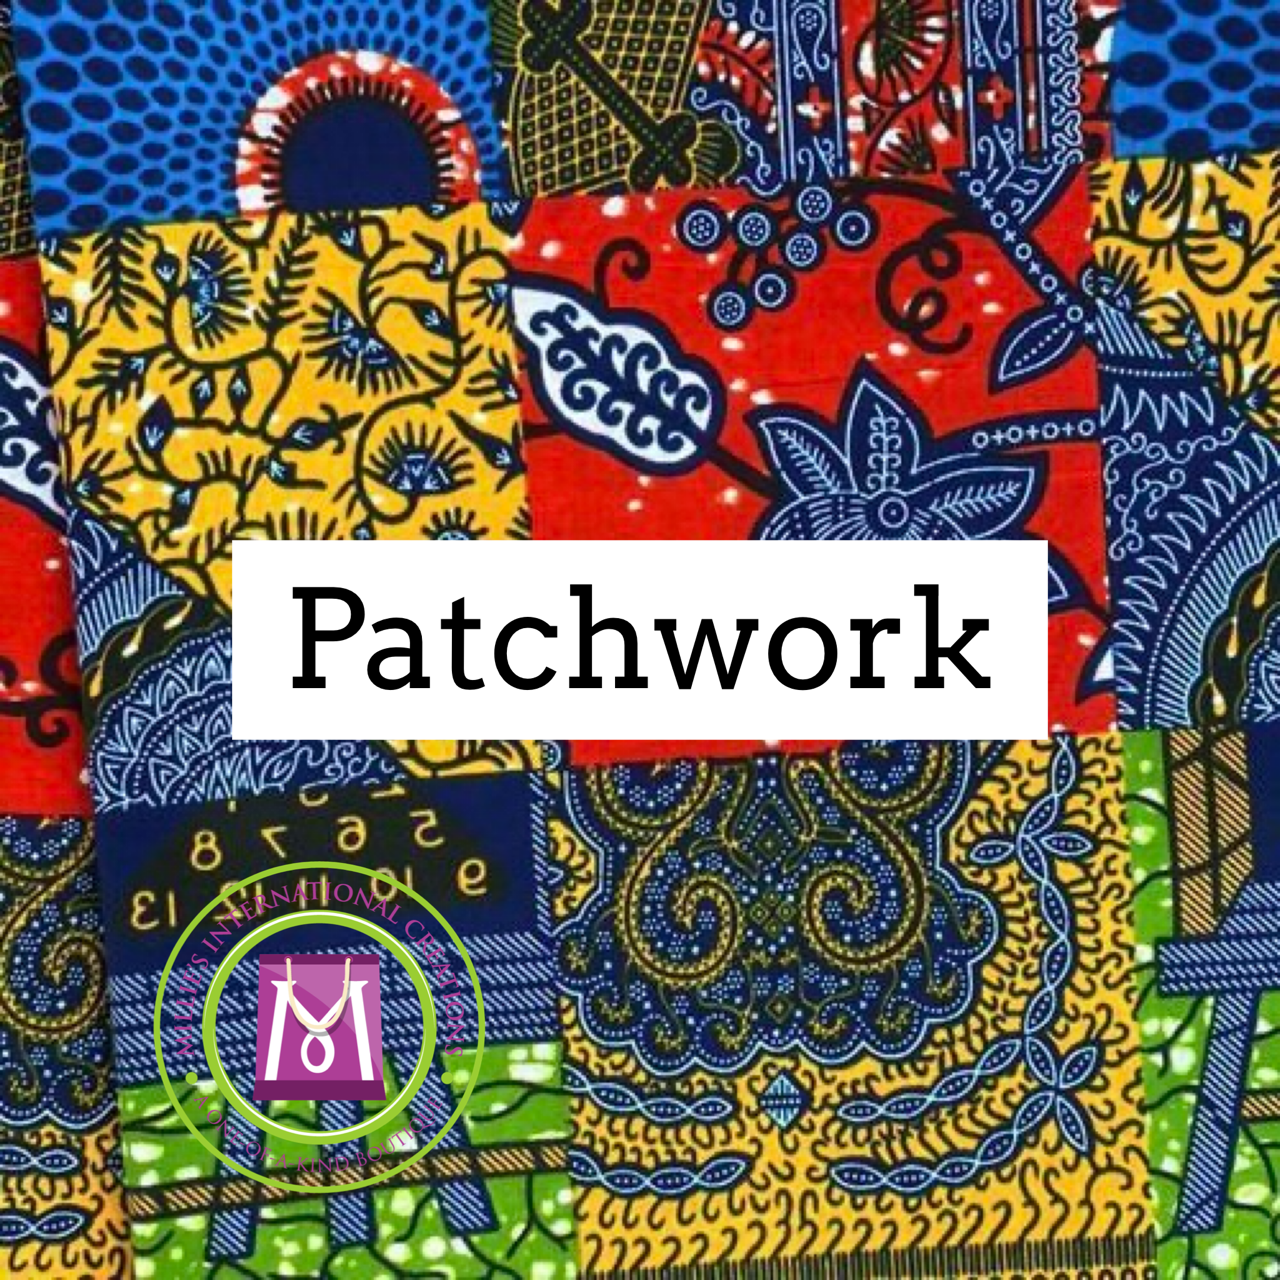 Patchwork (2 For $20 Special)